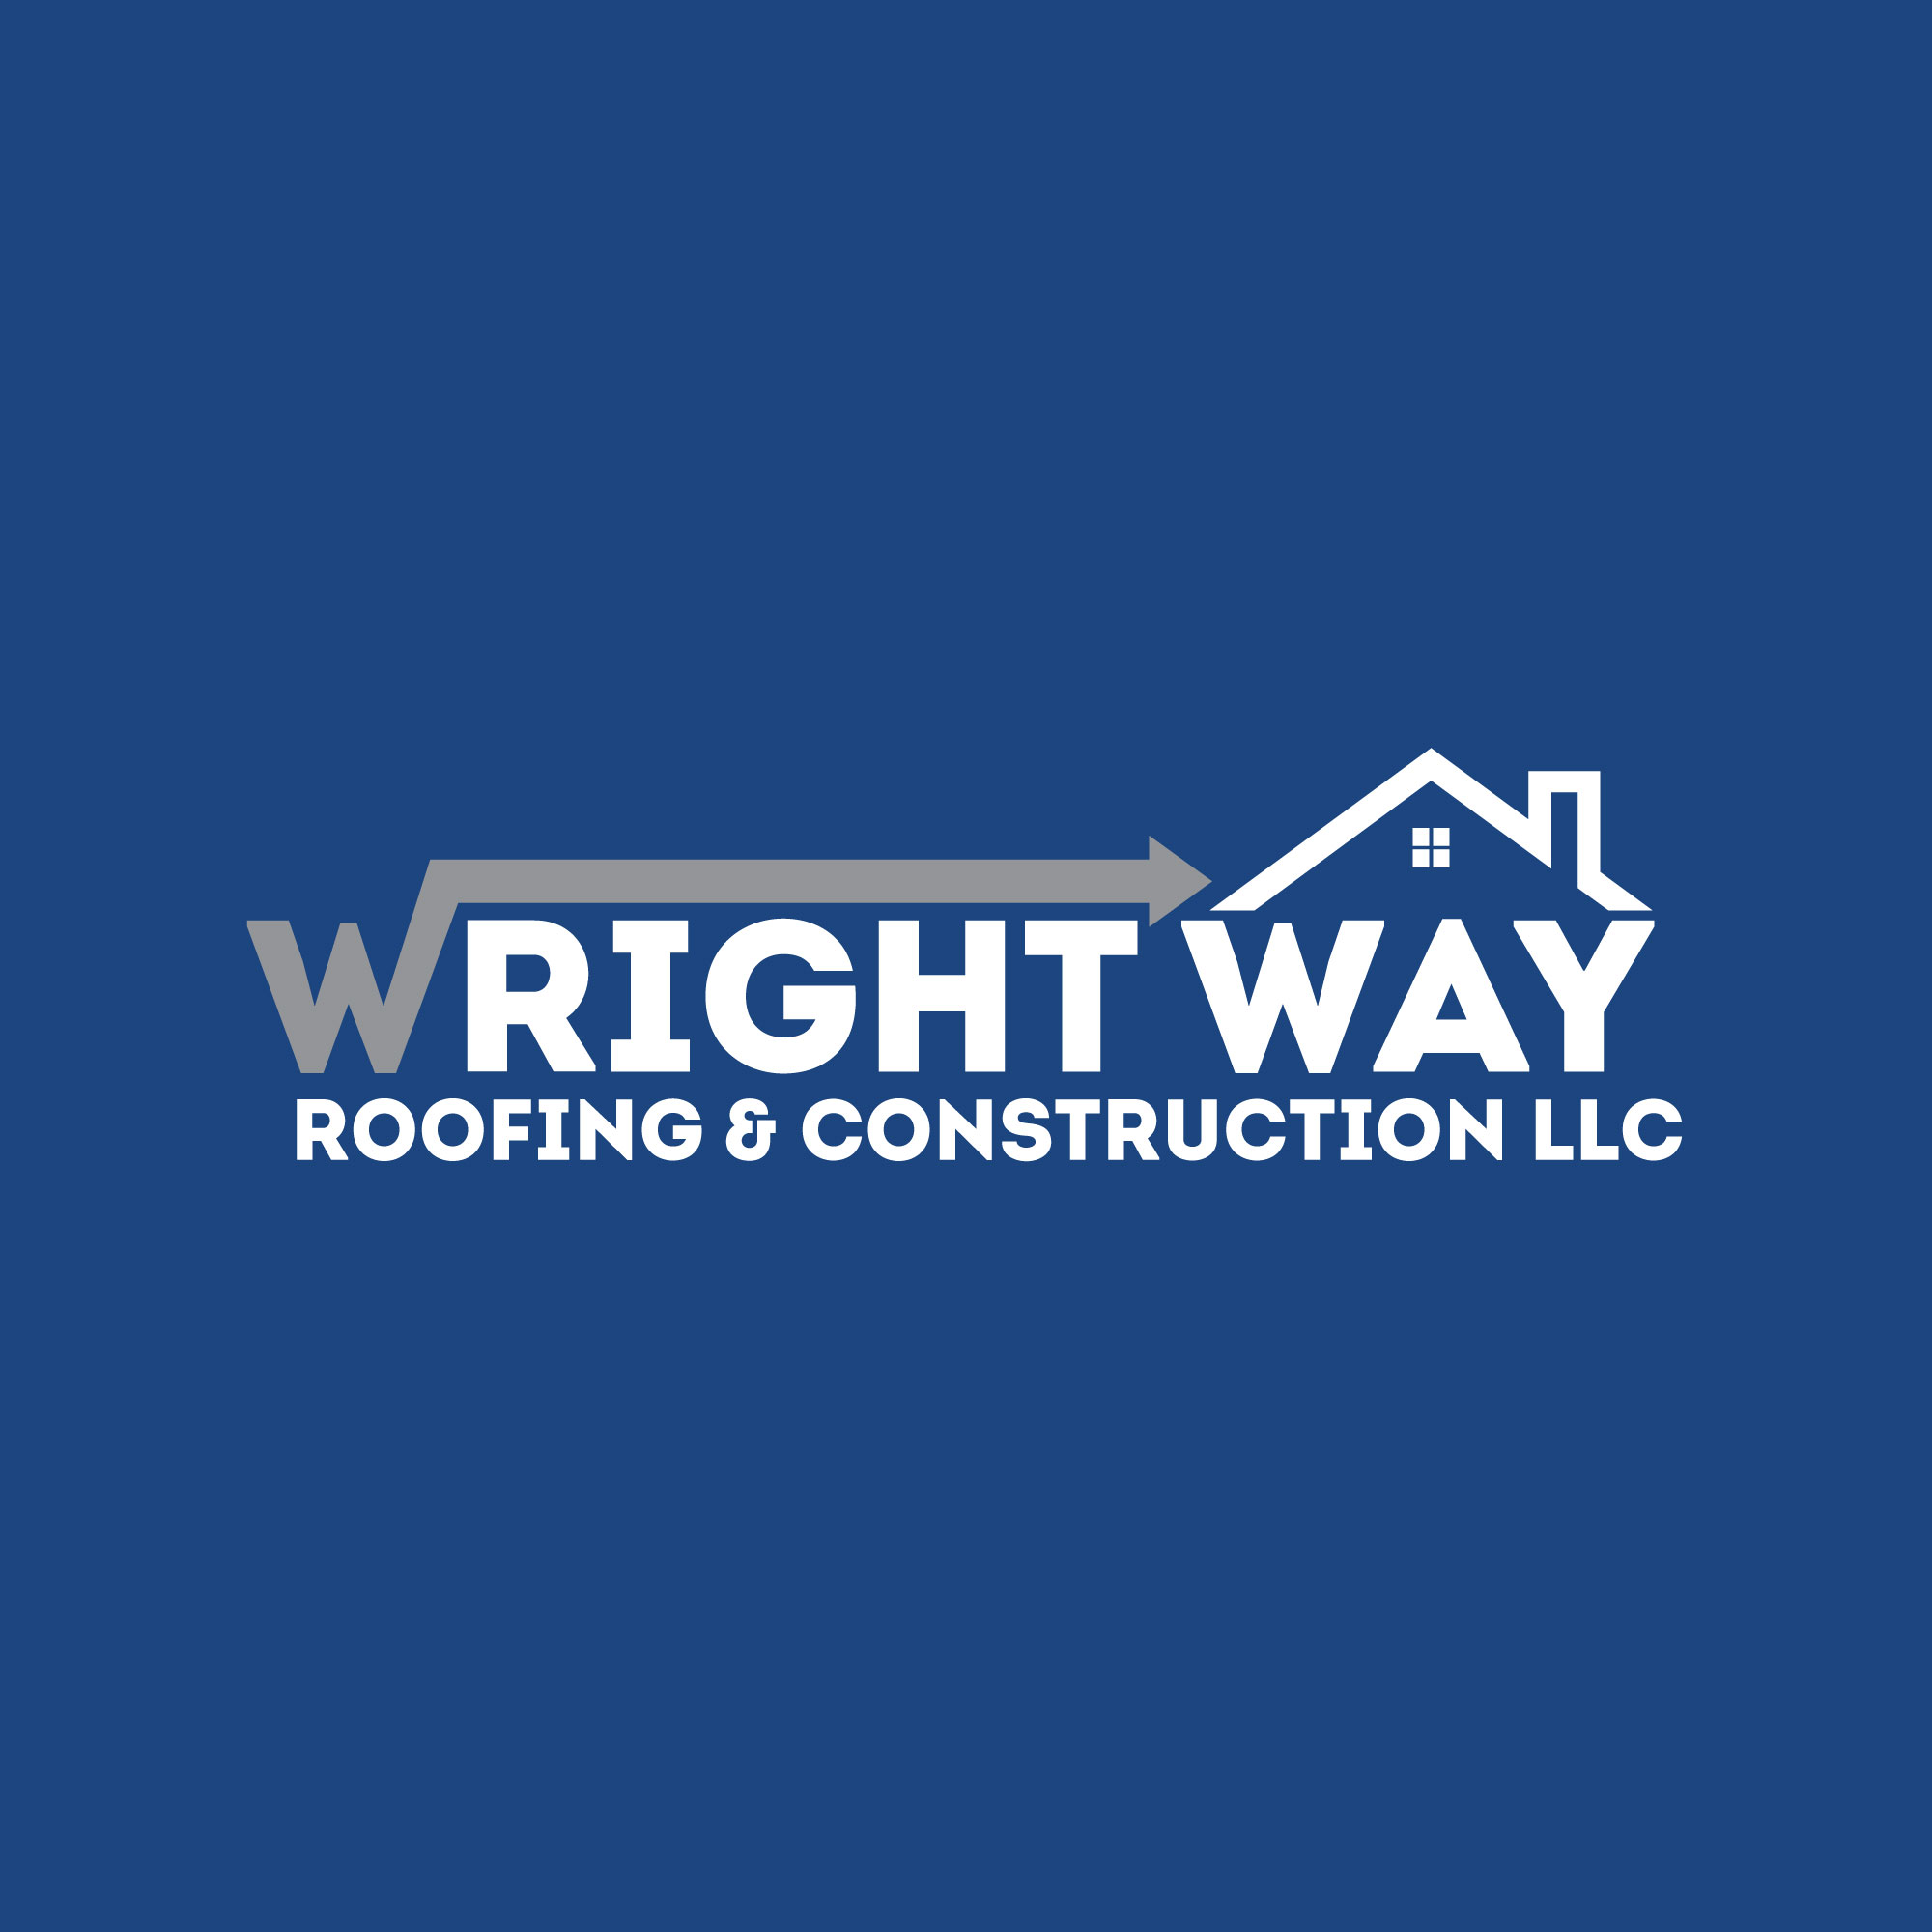 Wright Way Roofing and Construction Logo